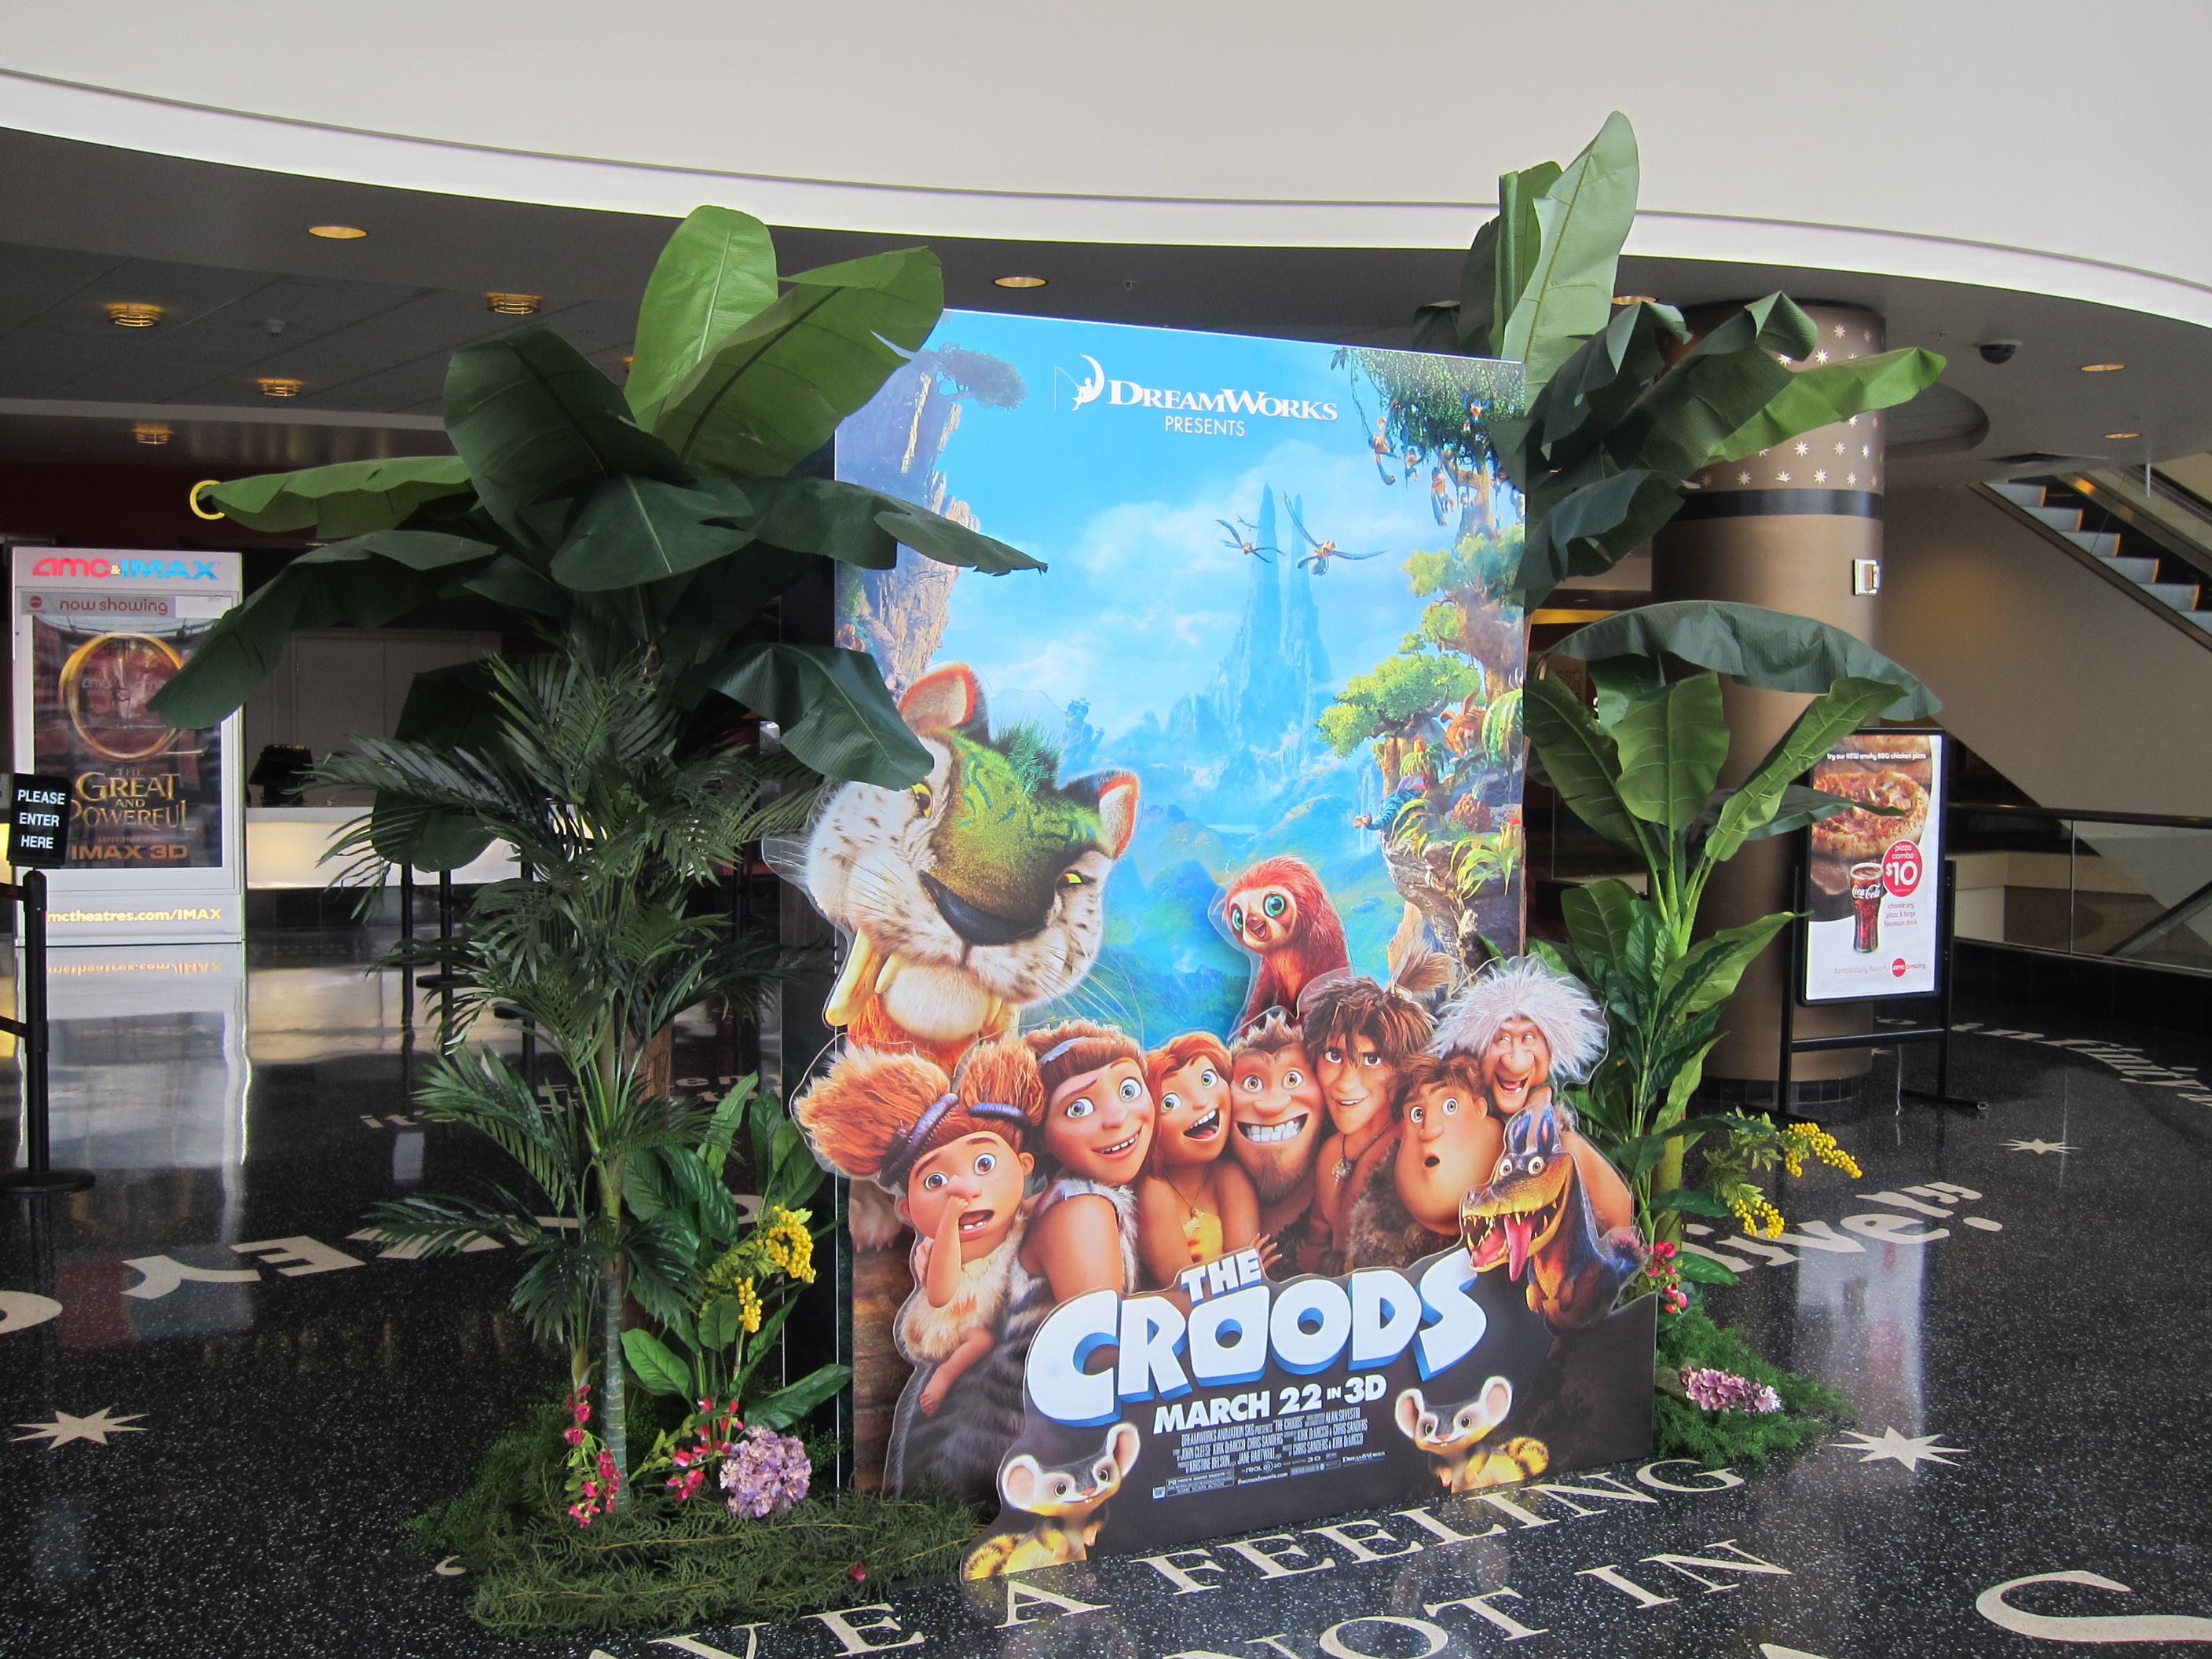 THE CROODS special layered display at the AMC Century City 15.